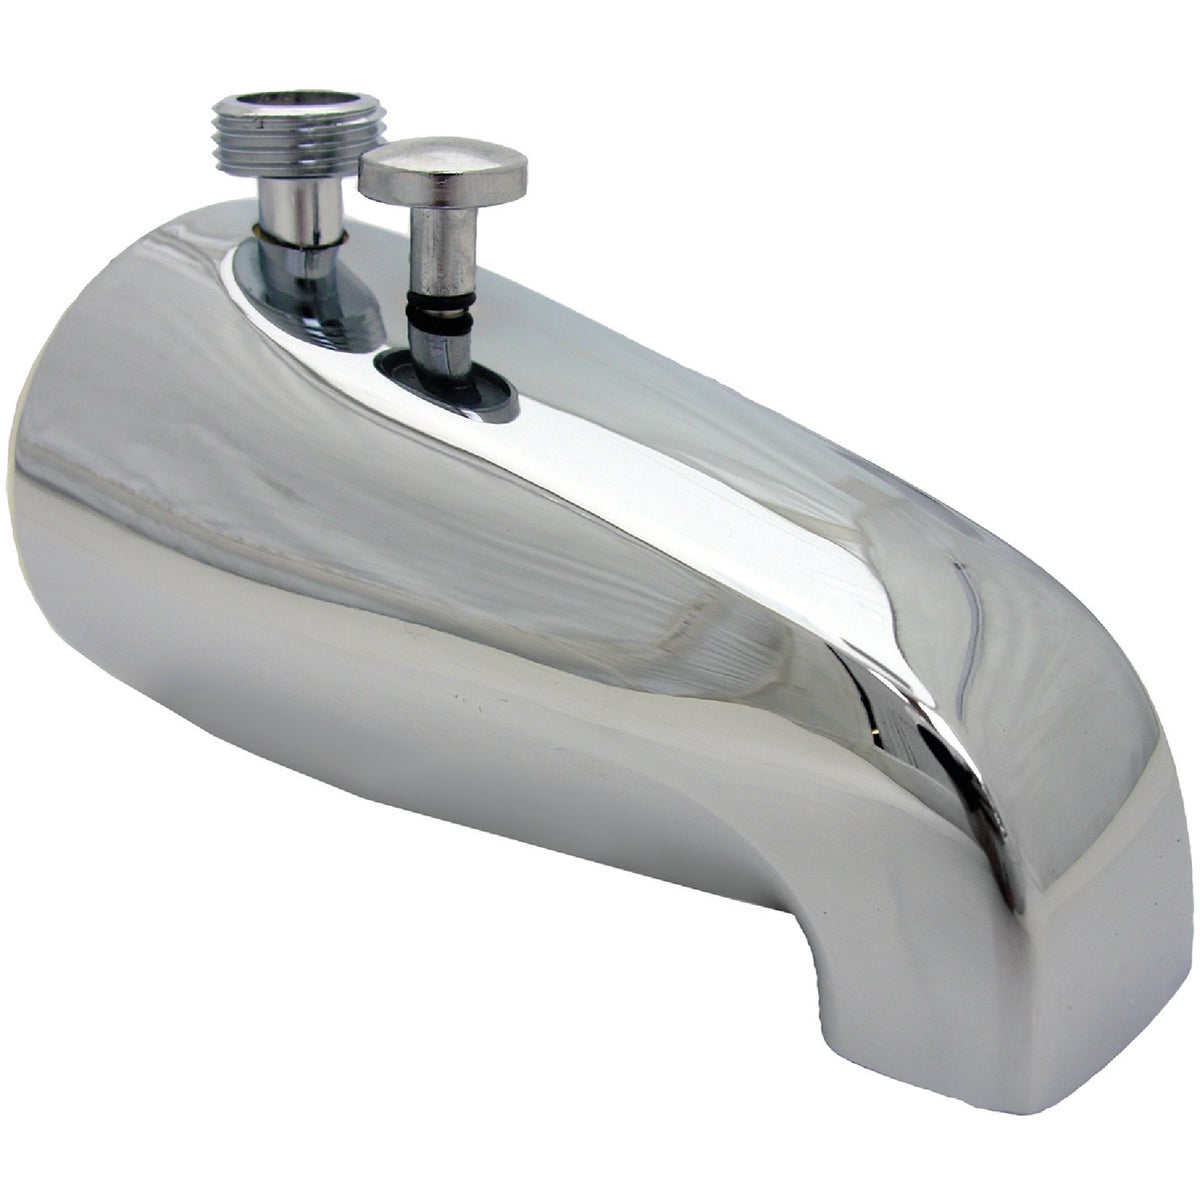 Lasco 1/2 In. or 3/4 In. Chrome Bathtub Spout with Diverter